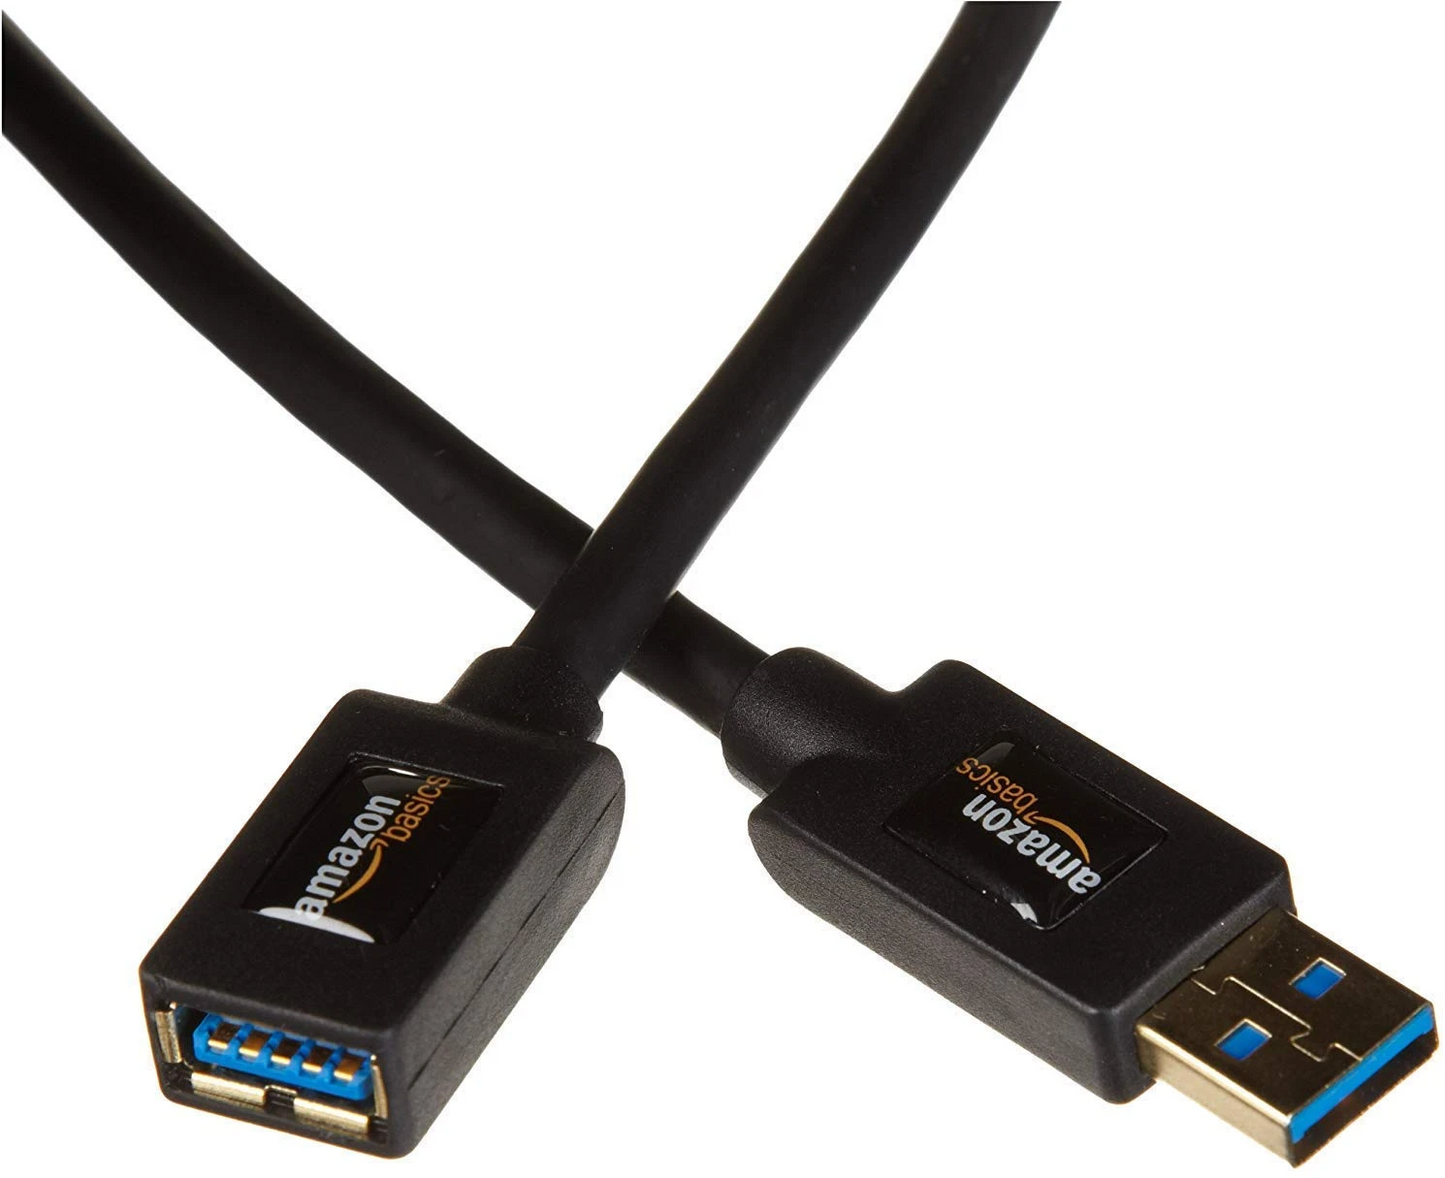 AmazonBasics USB 3.0 Extension Cable - USB-A Male to USA-A Female - 2 Metres